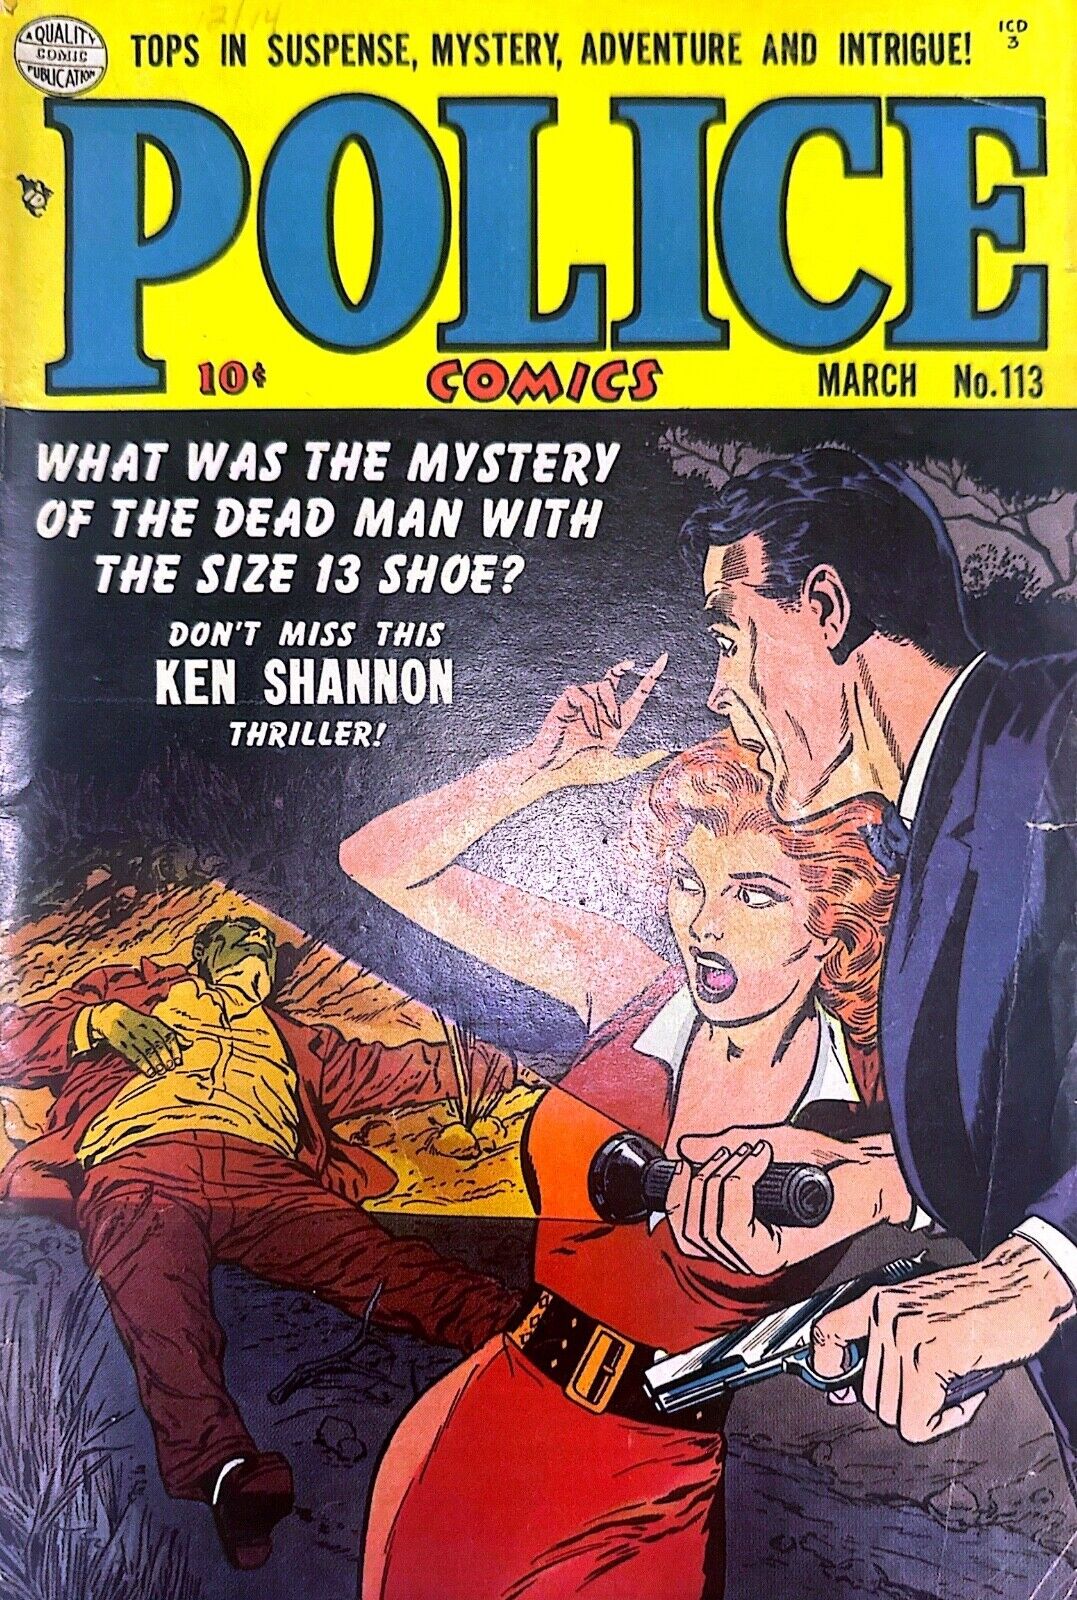 Police Comics #113 by Quality Comic Publications (1952) - Good/Very good (3.0)